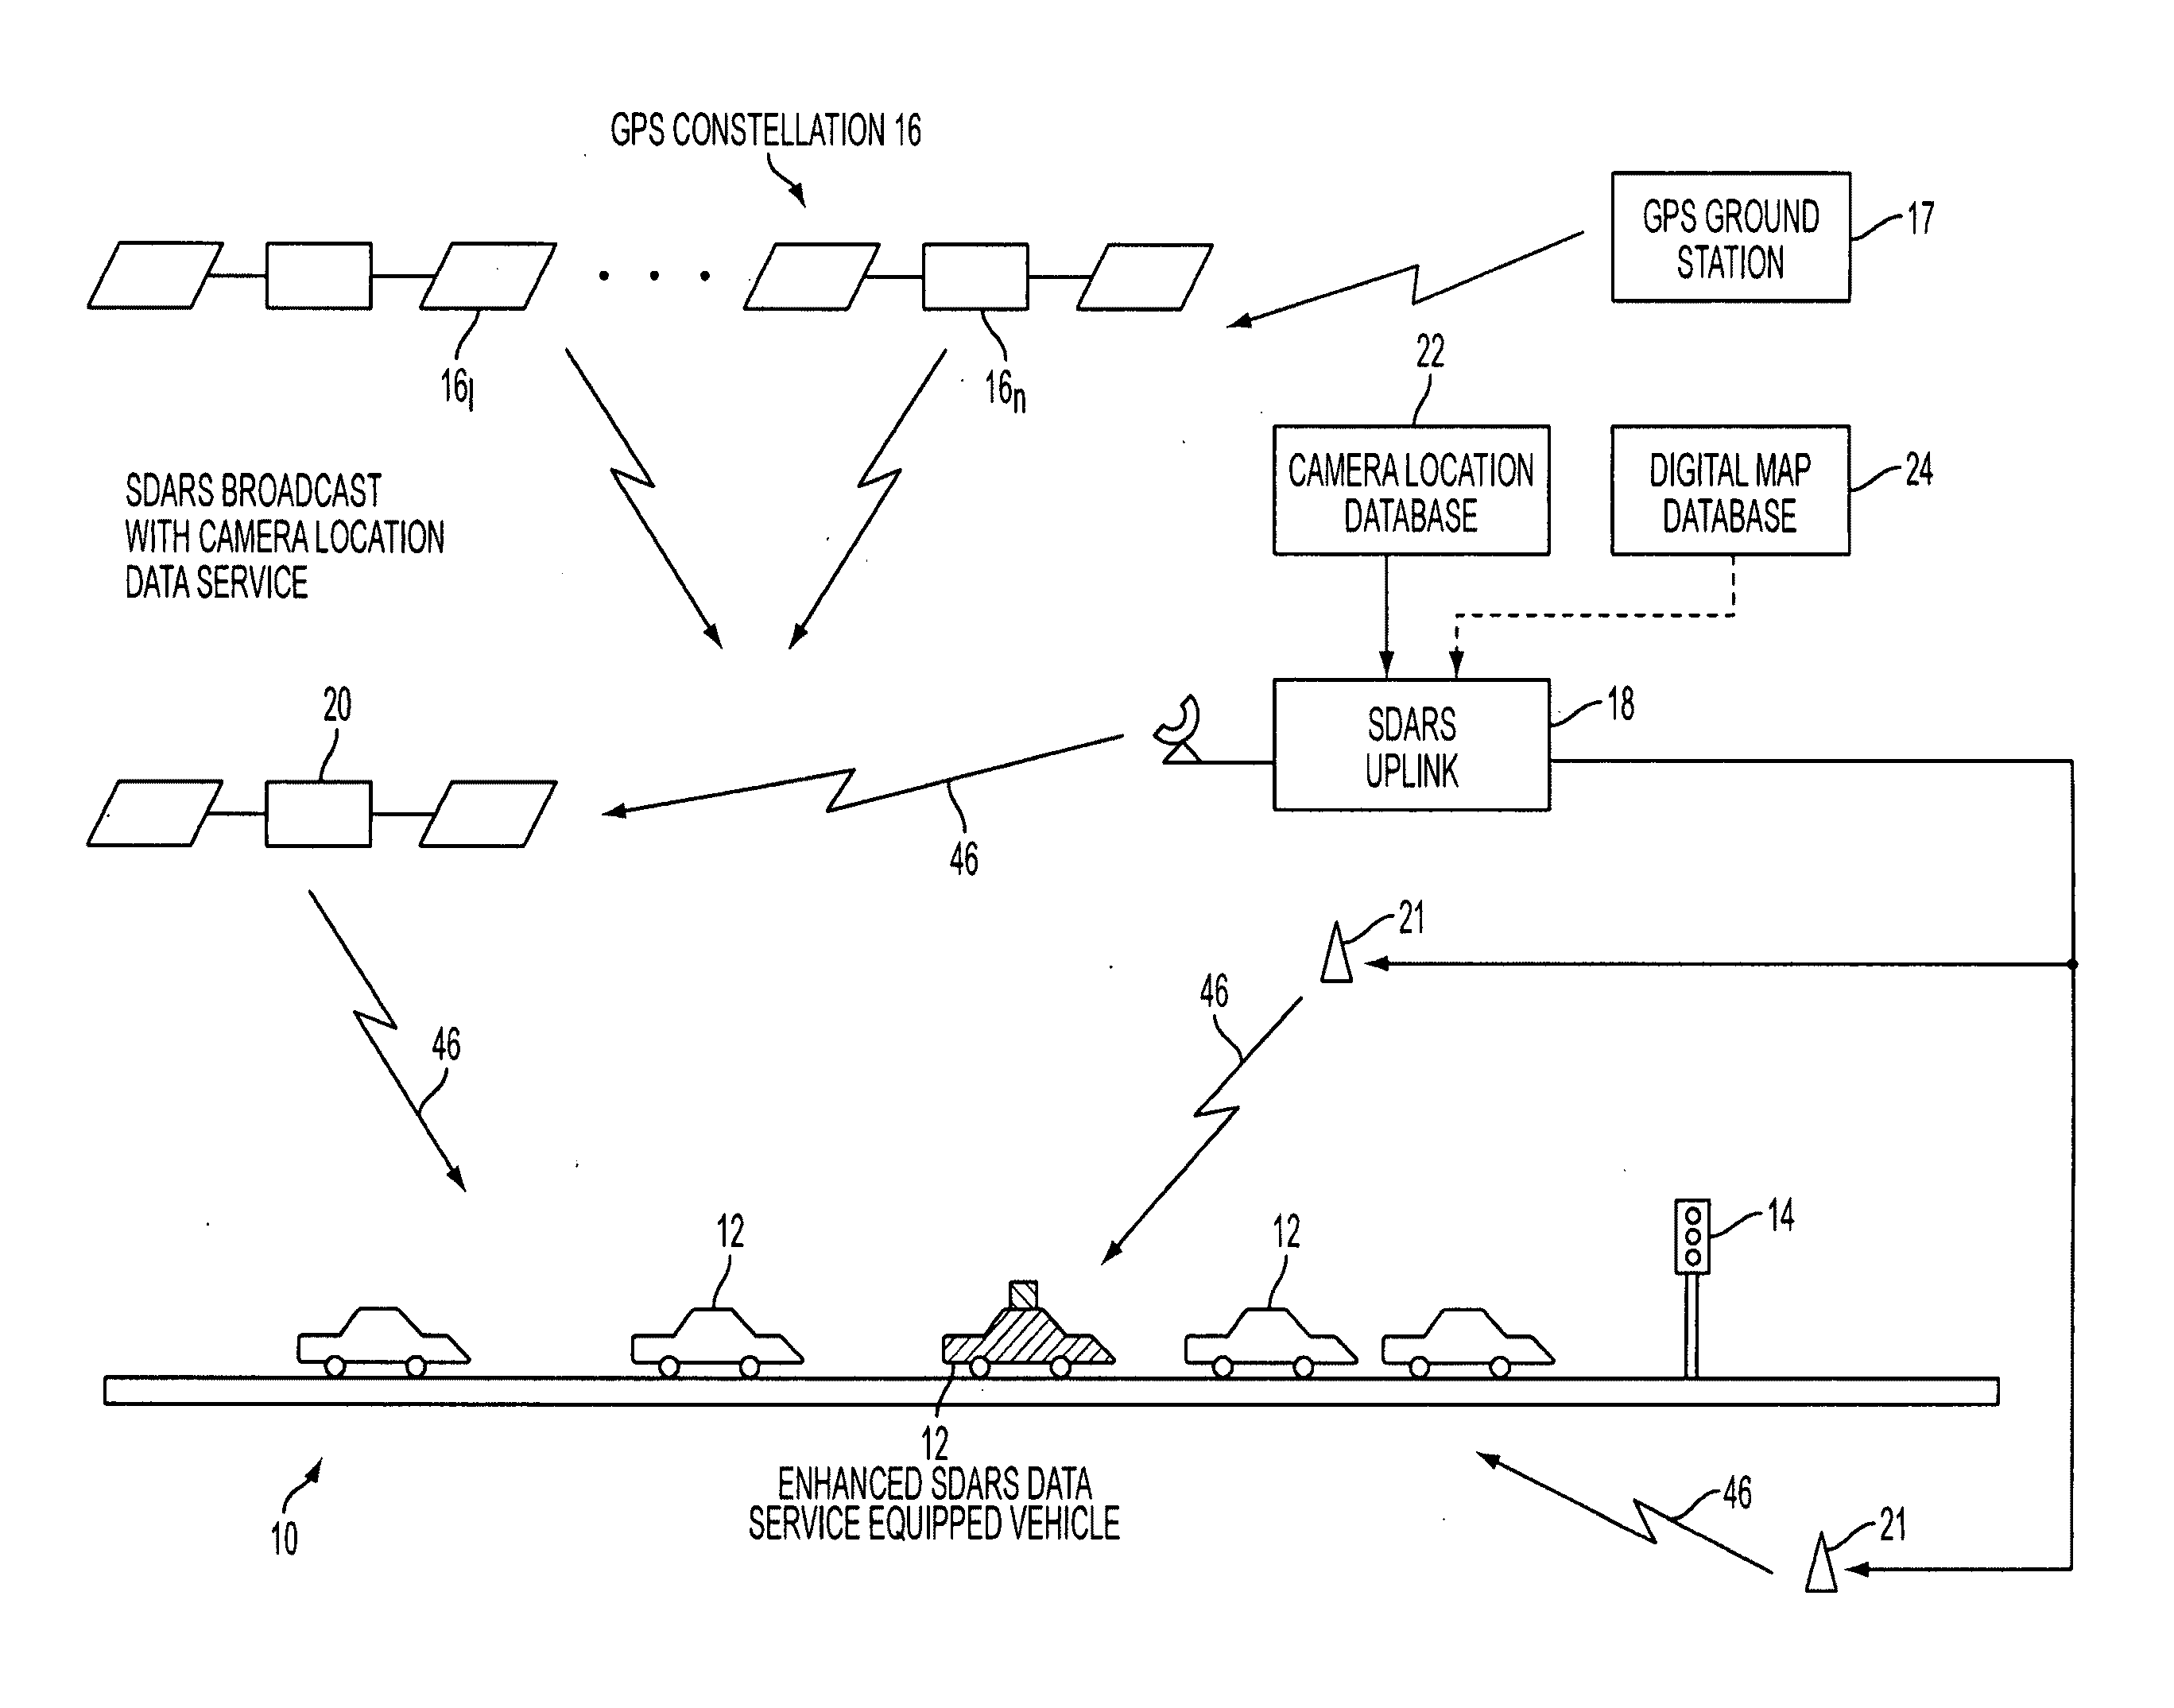 System and Method For  Improved Updating And Annunciation Of Traffic Enforcement Camera Information In A Vehicle Using A Broadcast Content Delivery Service